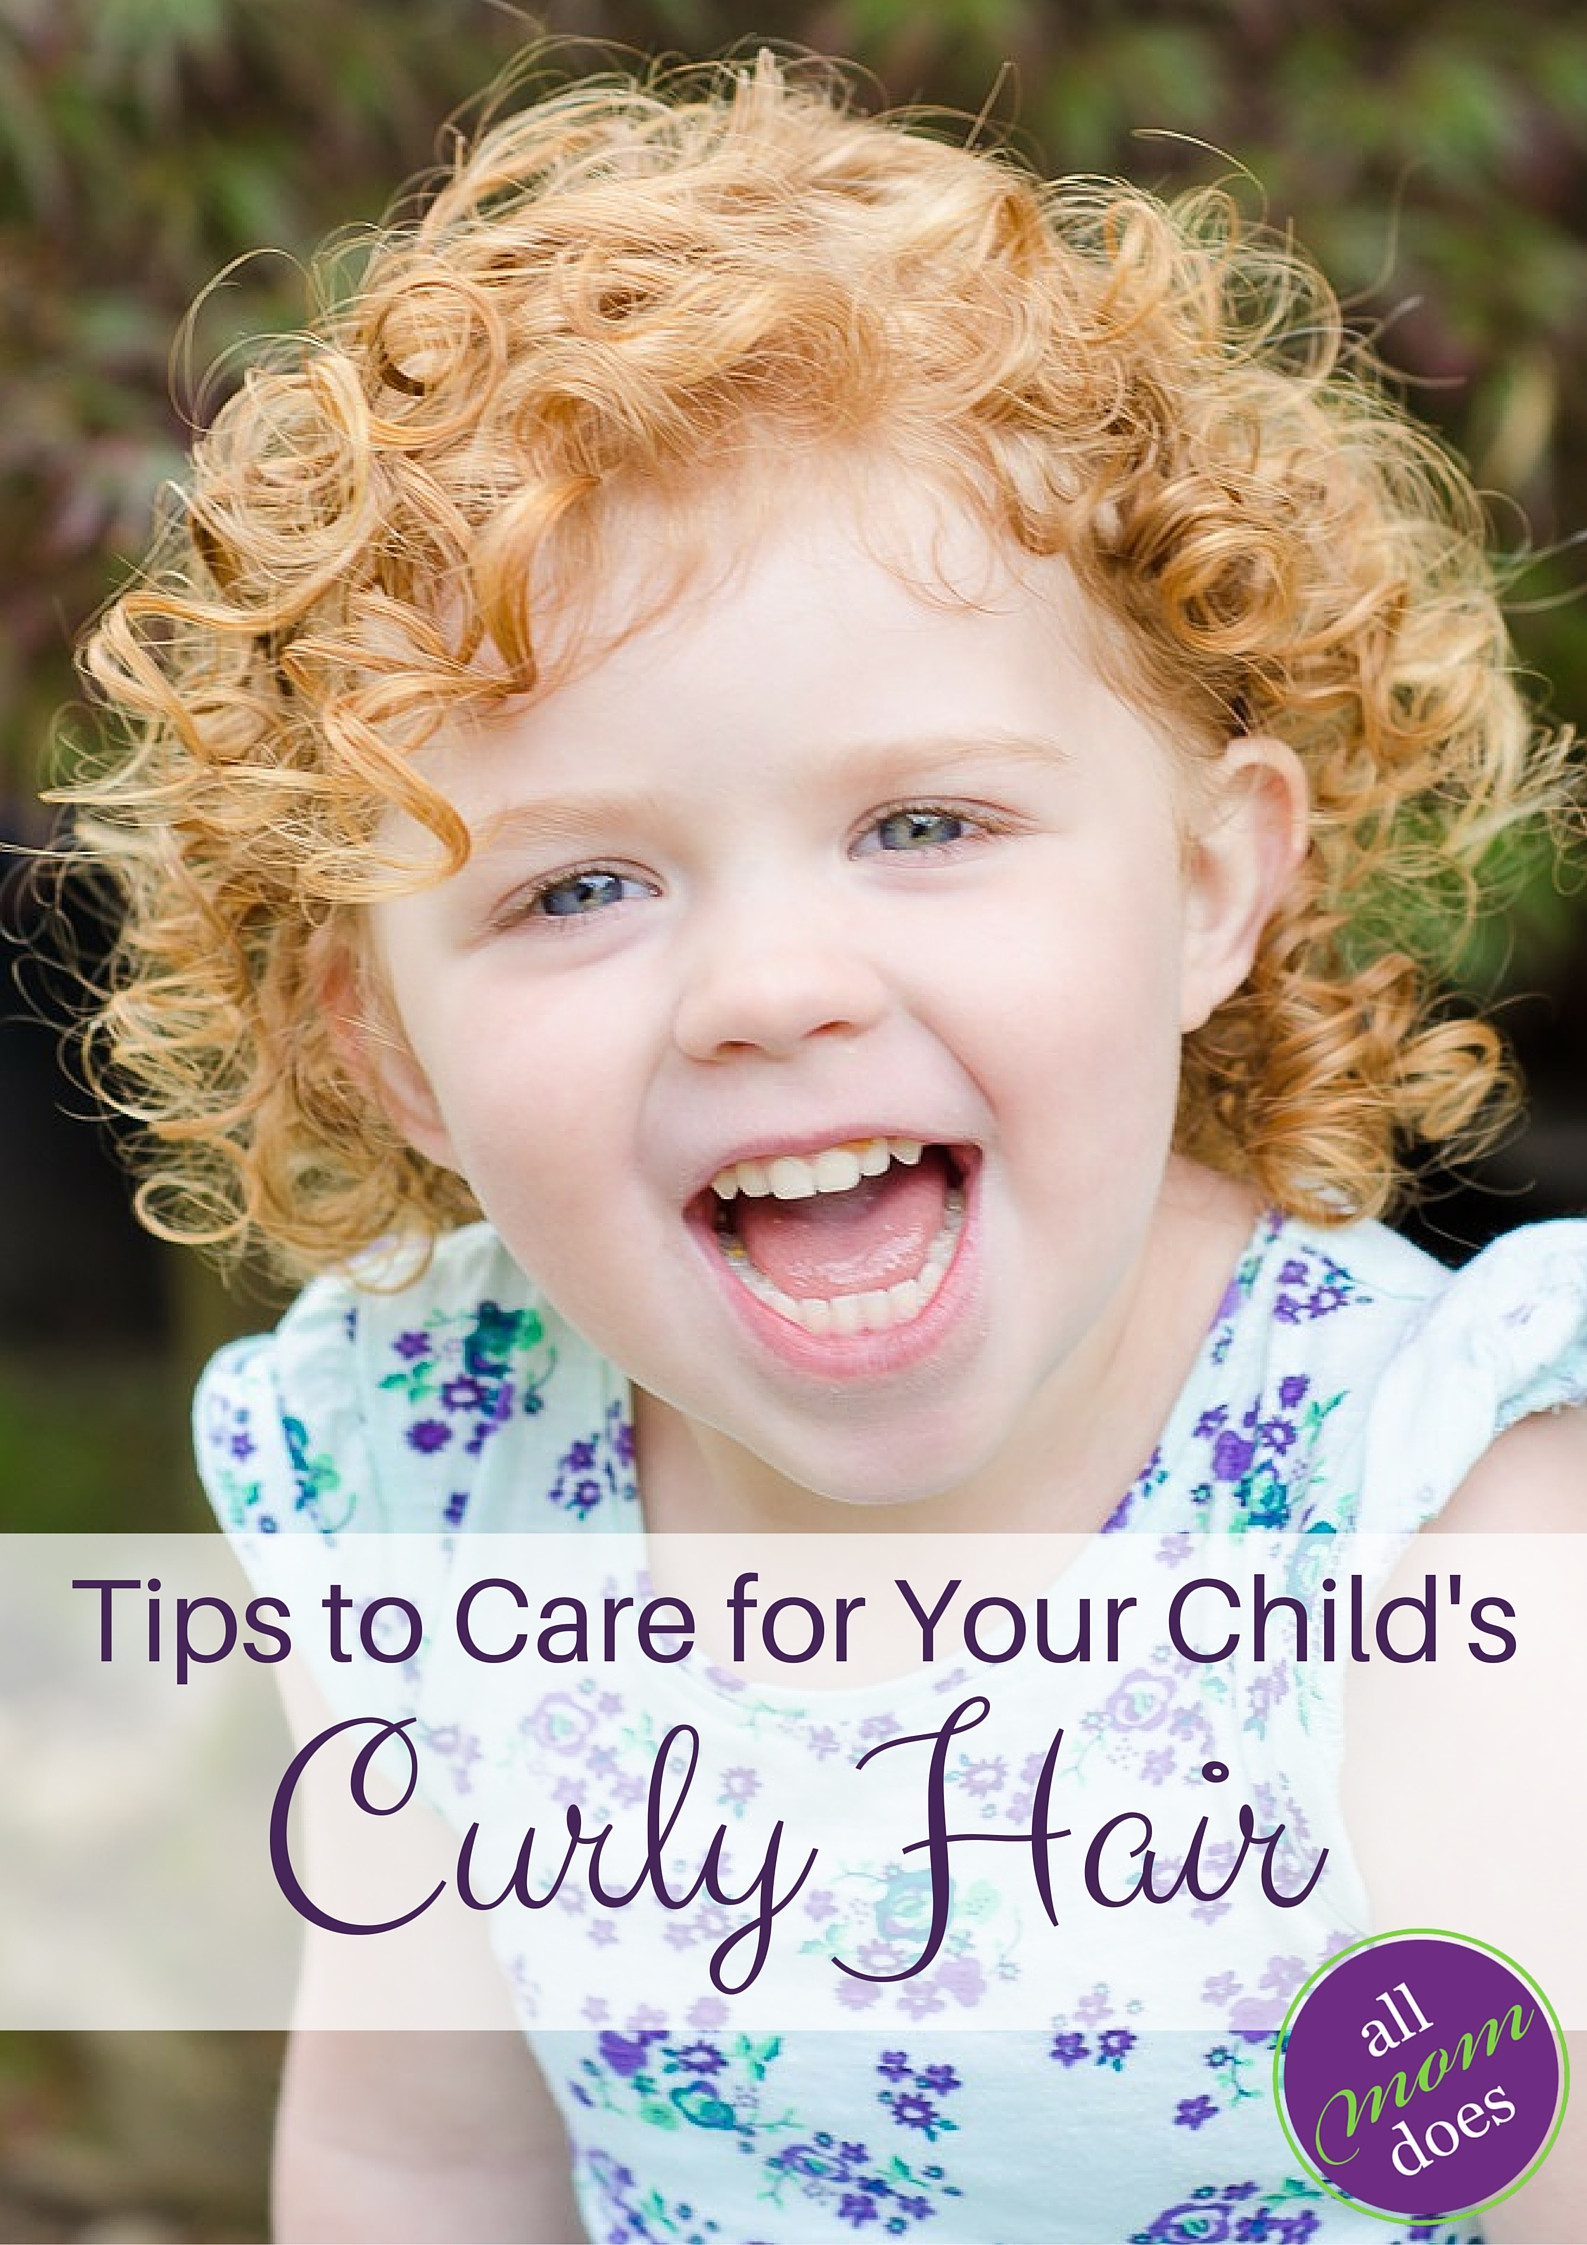 Curly Hair Styles For Kids
 Tips to Care for Your Child’s Curly Hair